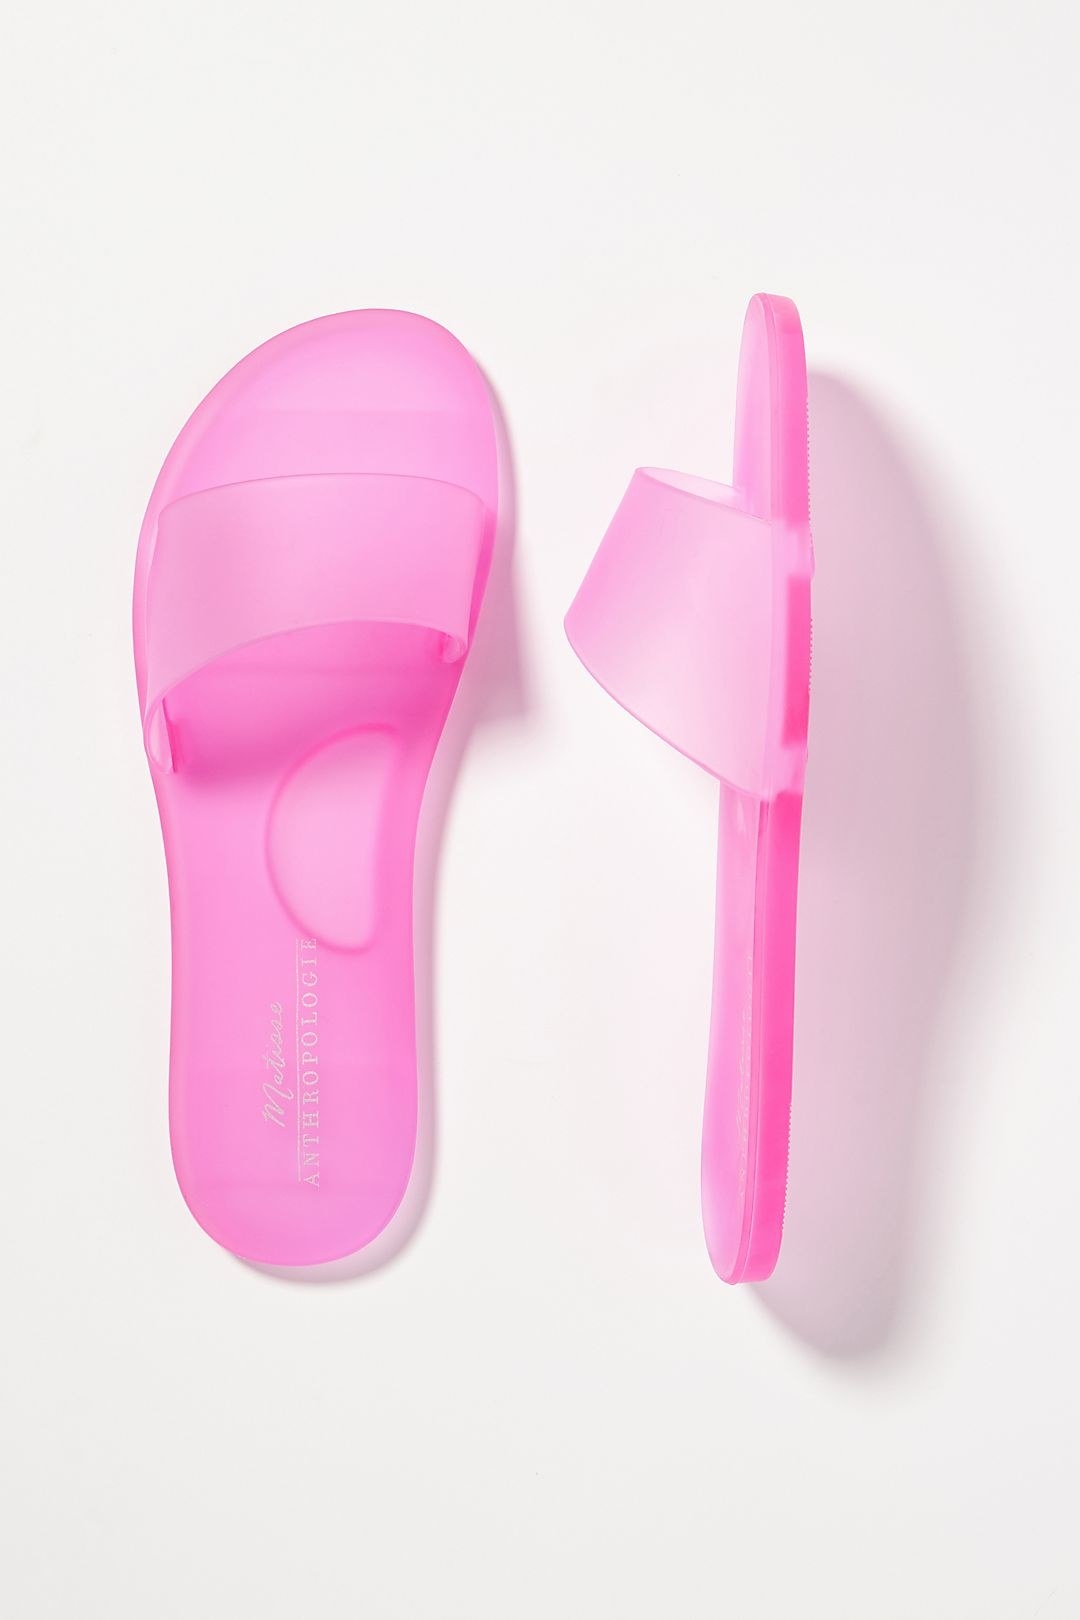 the pink matisse jelly sandals